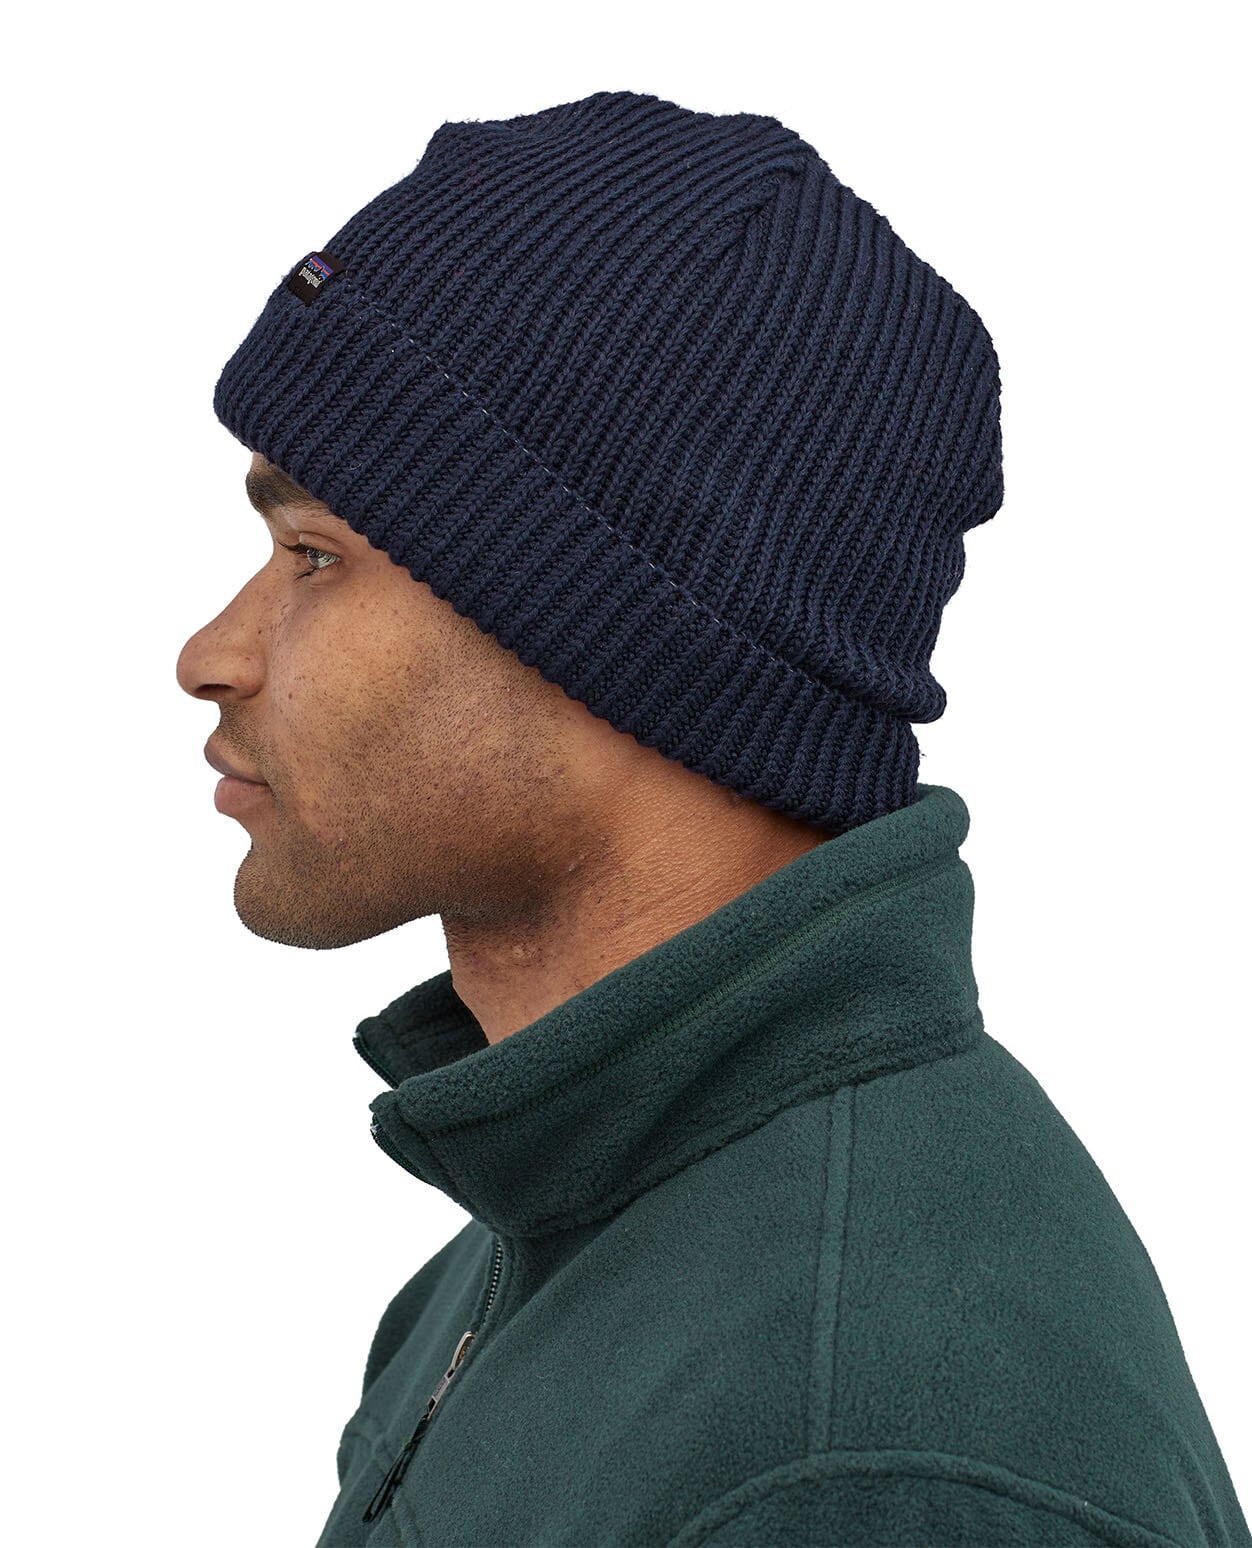 Patagonia Fishermans Rolled Beanie Navy Blue